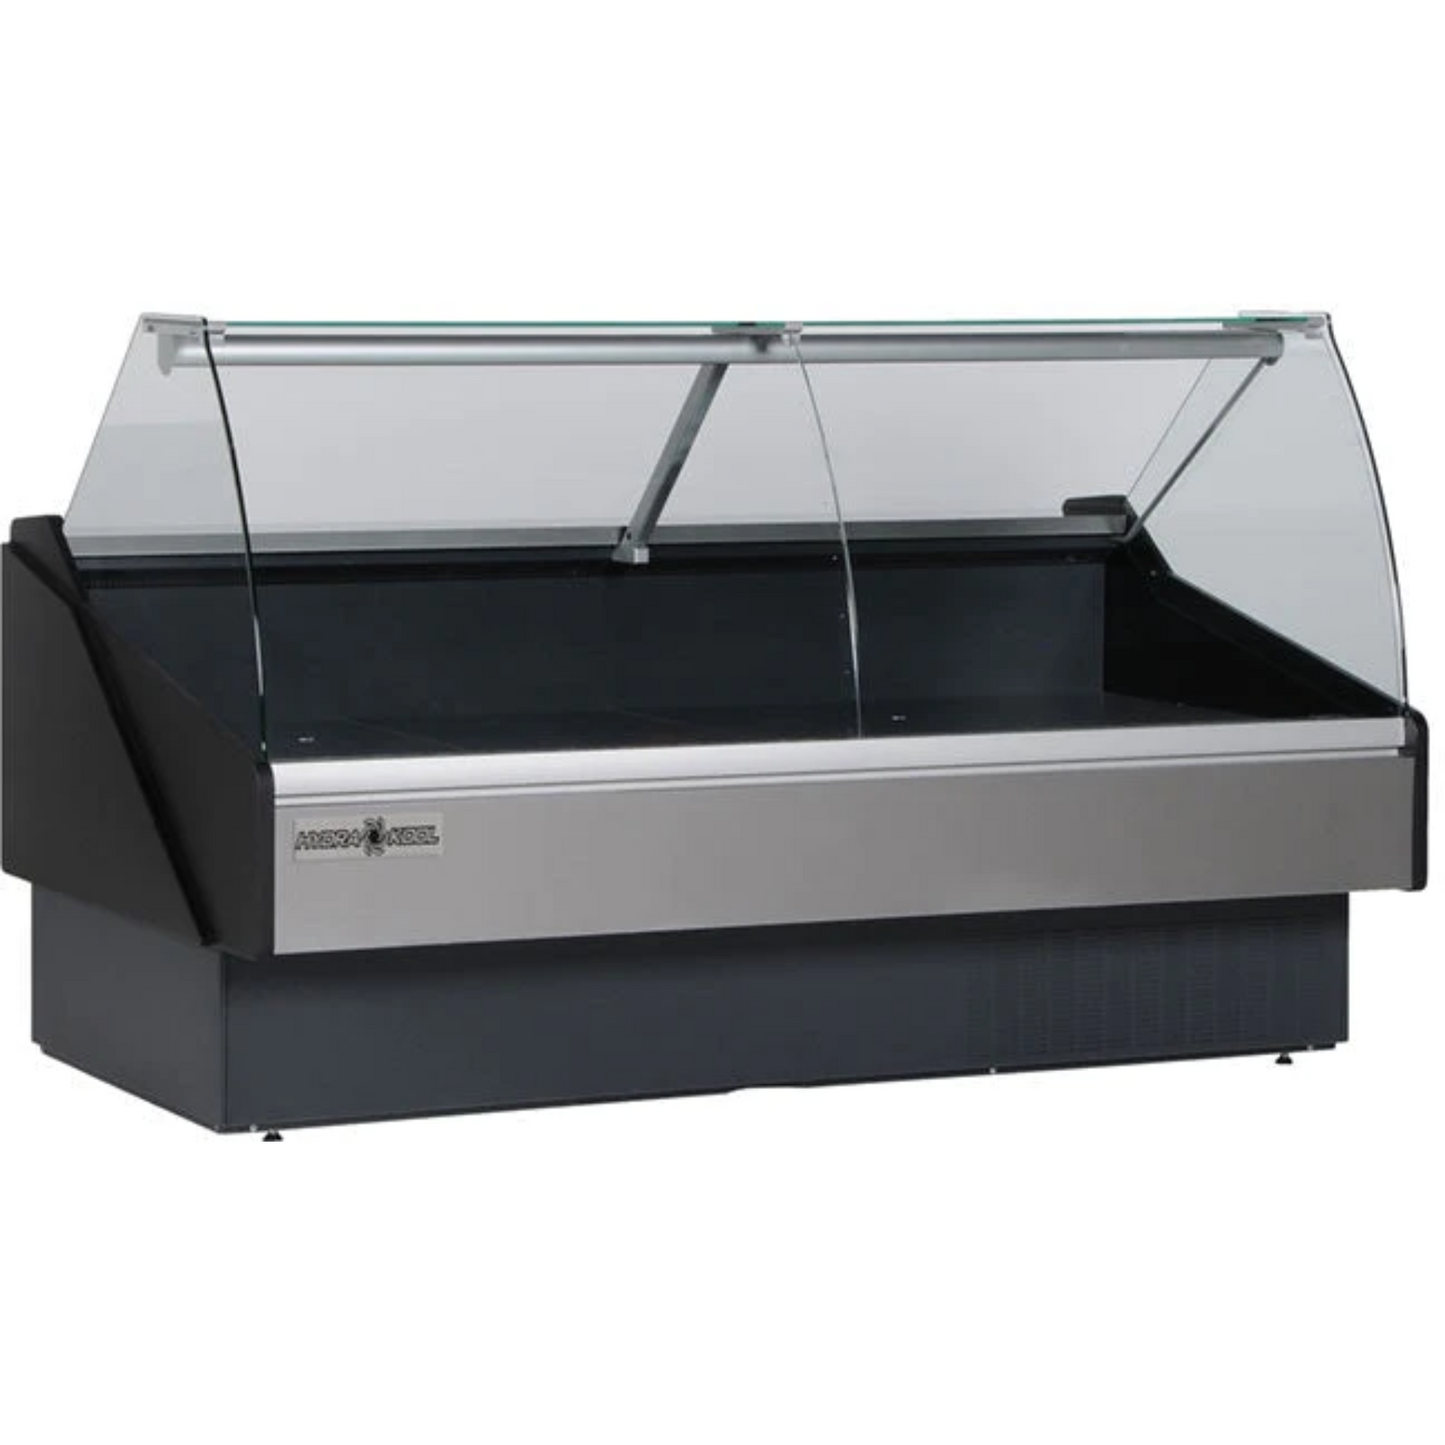 Hydra-Kool KFM-CG-40-S 40" Fresh Meat & Deli Case Curved Glass Self-Contained